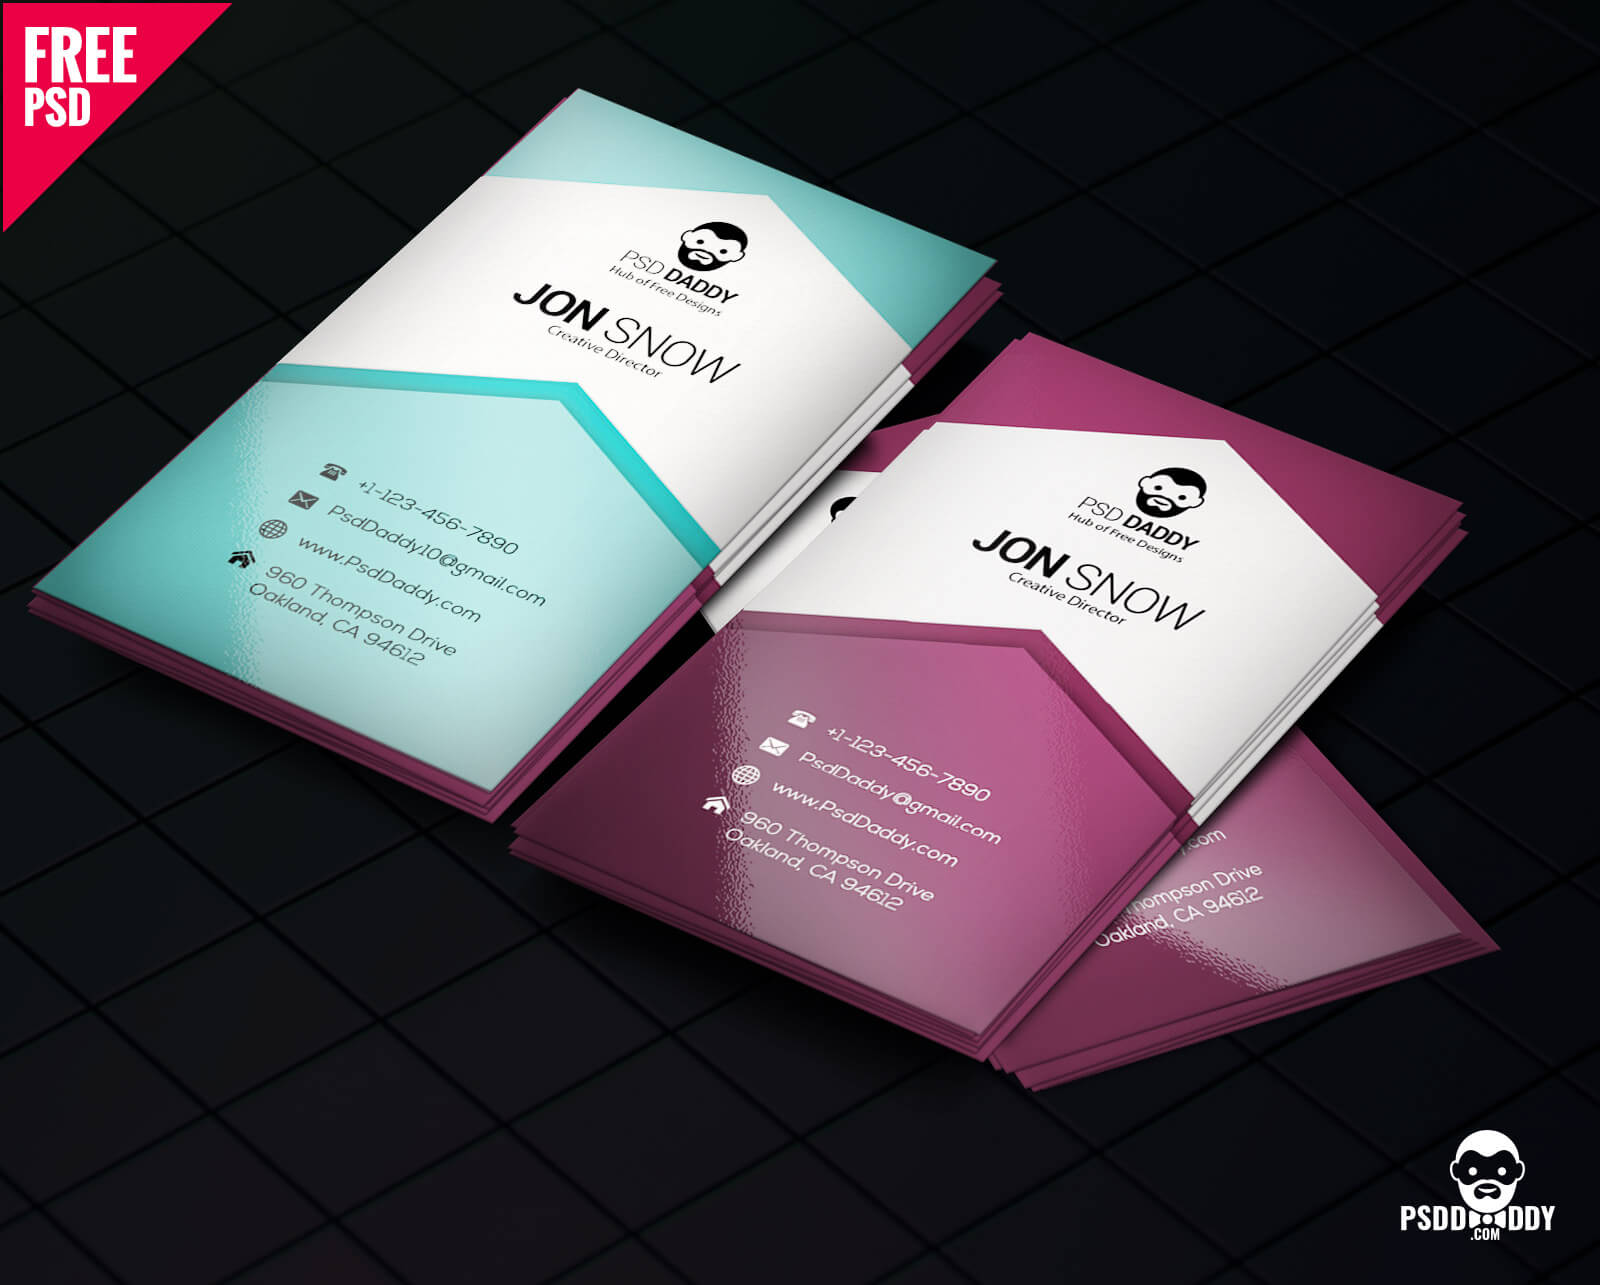 Download]Creative Business Card Psd Free | Psddaddy Inside Visiting Card Templates Psd Free Download